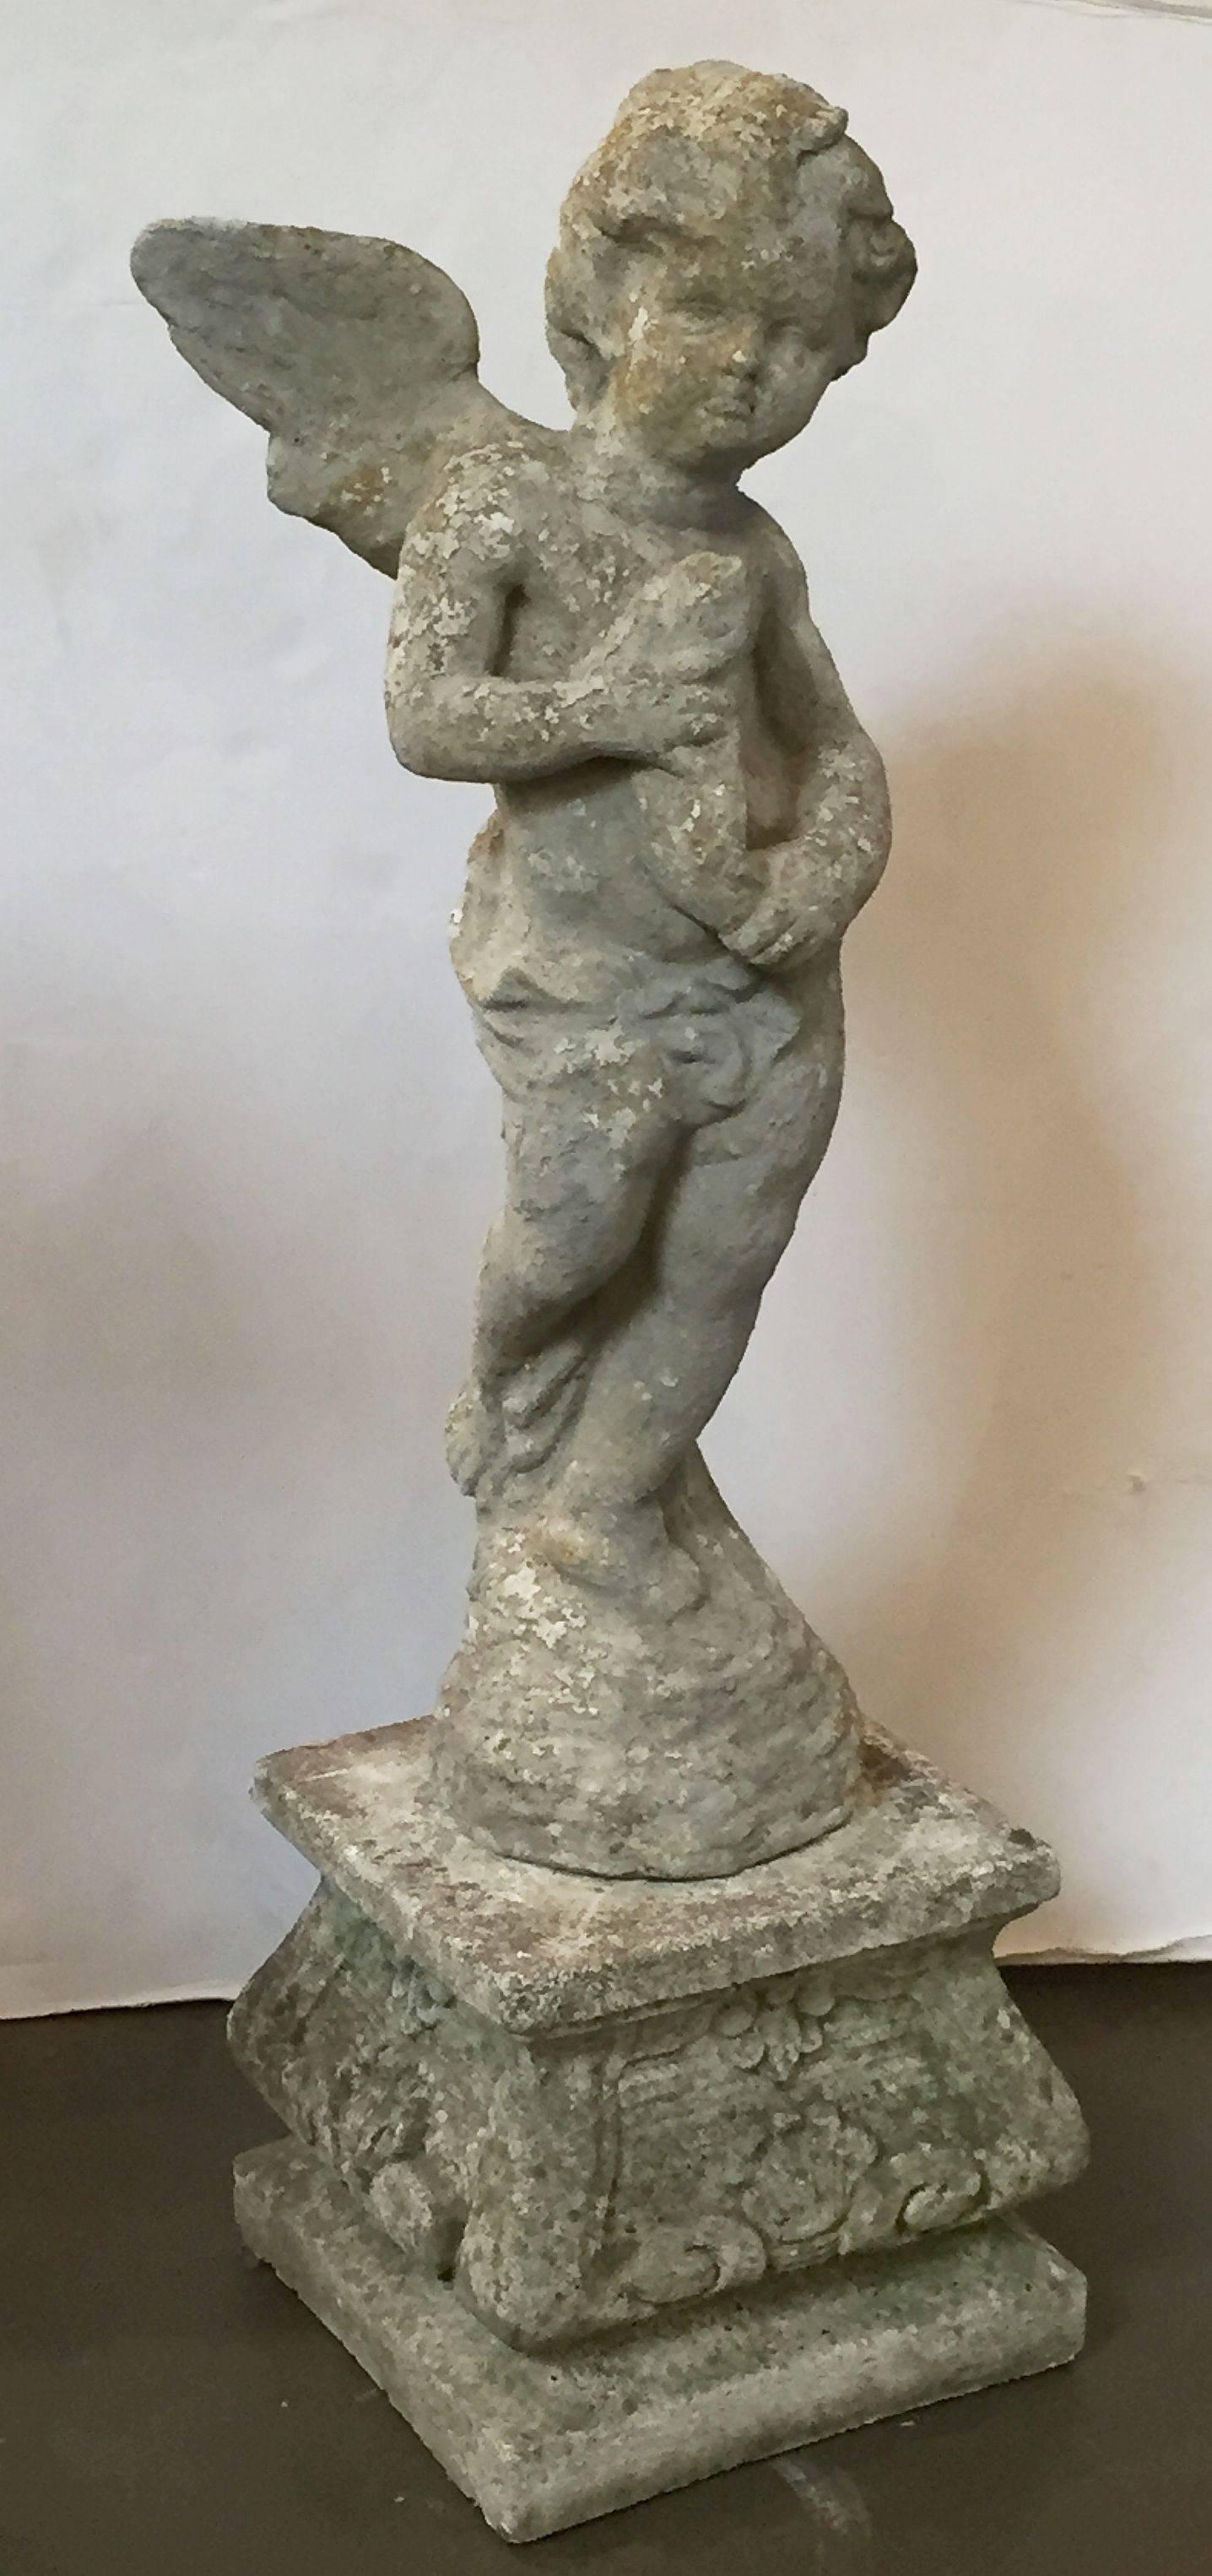 A fine English garden ornamental statue of weathered composition stone, featuring a winged angel holding a fish, standing on a separate square plinth. The plinth base with a relief design of scrolls and seashells.

Perfect for a garden room or